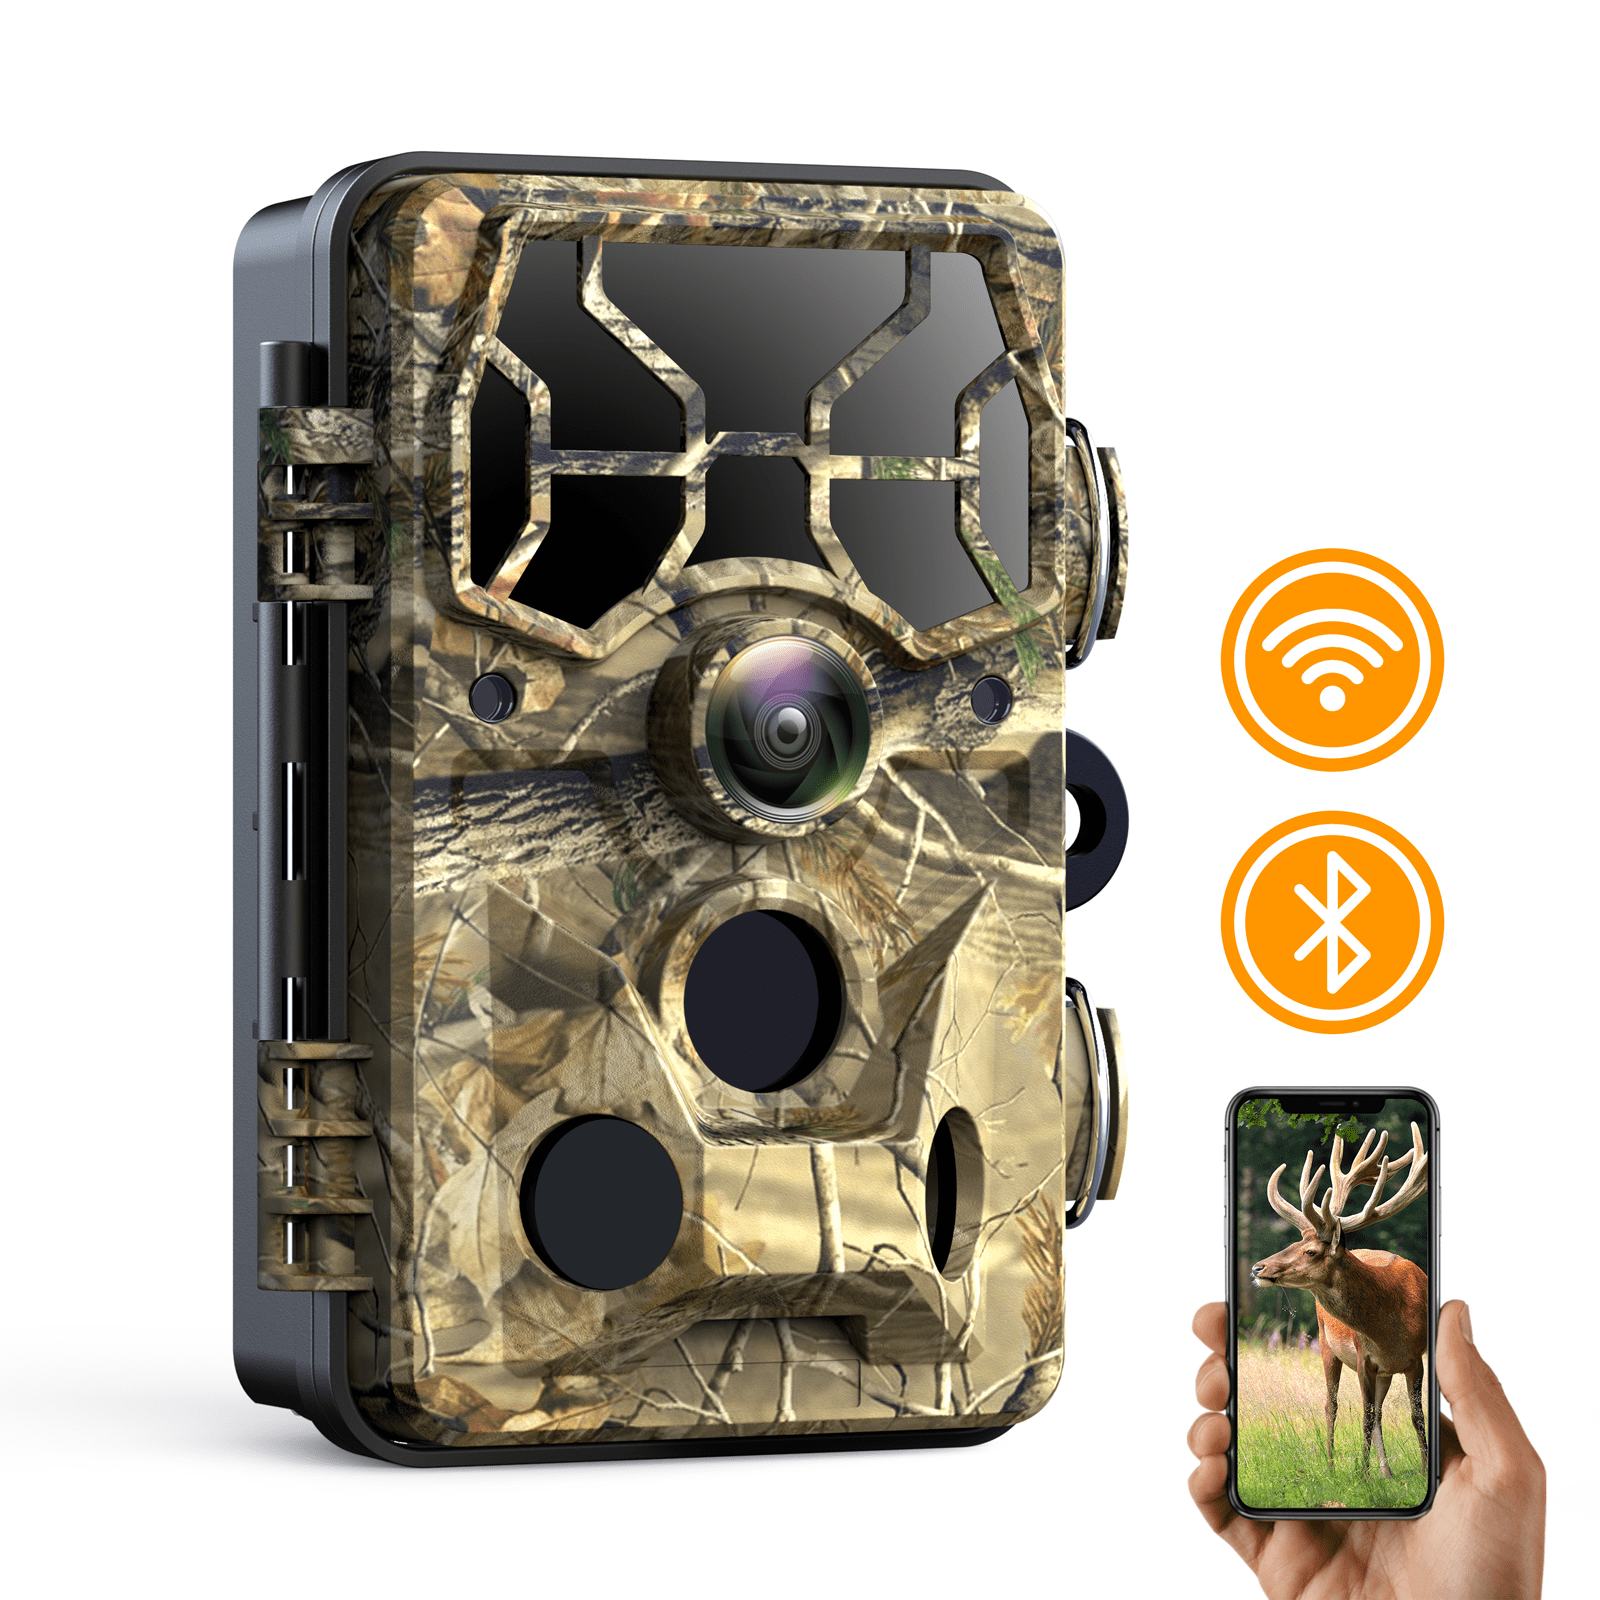 Campark Trail Camera 16MP 1080P Hunting Game Cam Wildlife Monitoring NightVision 